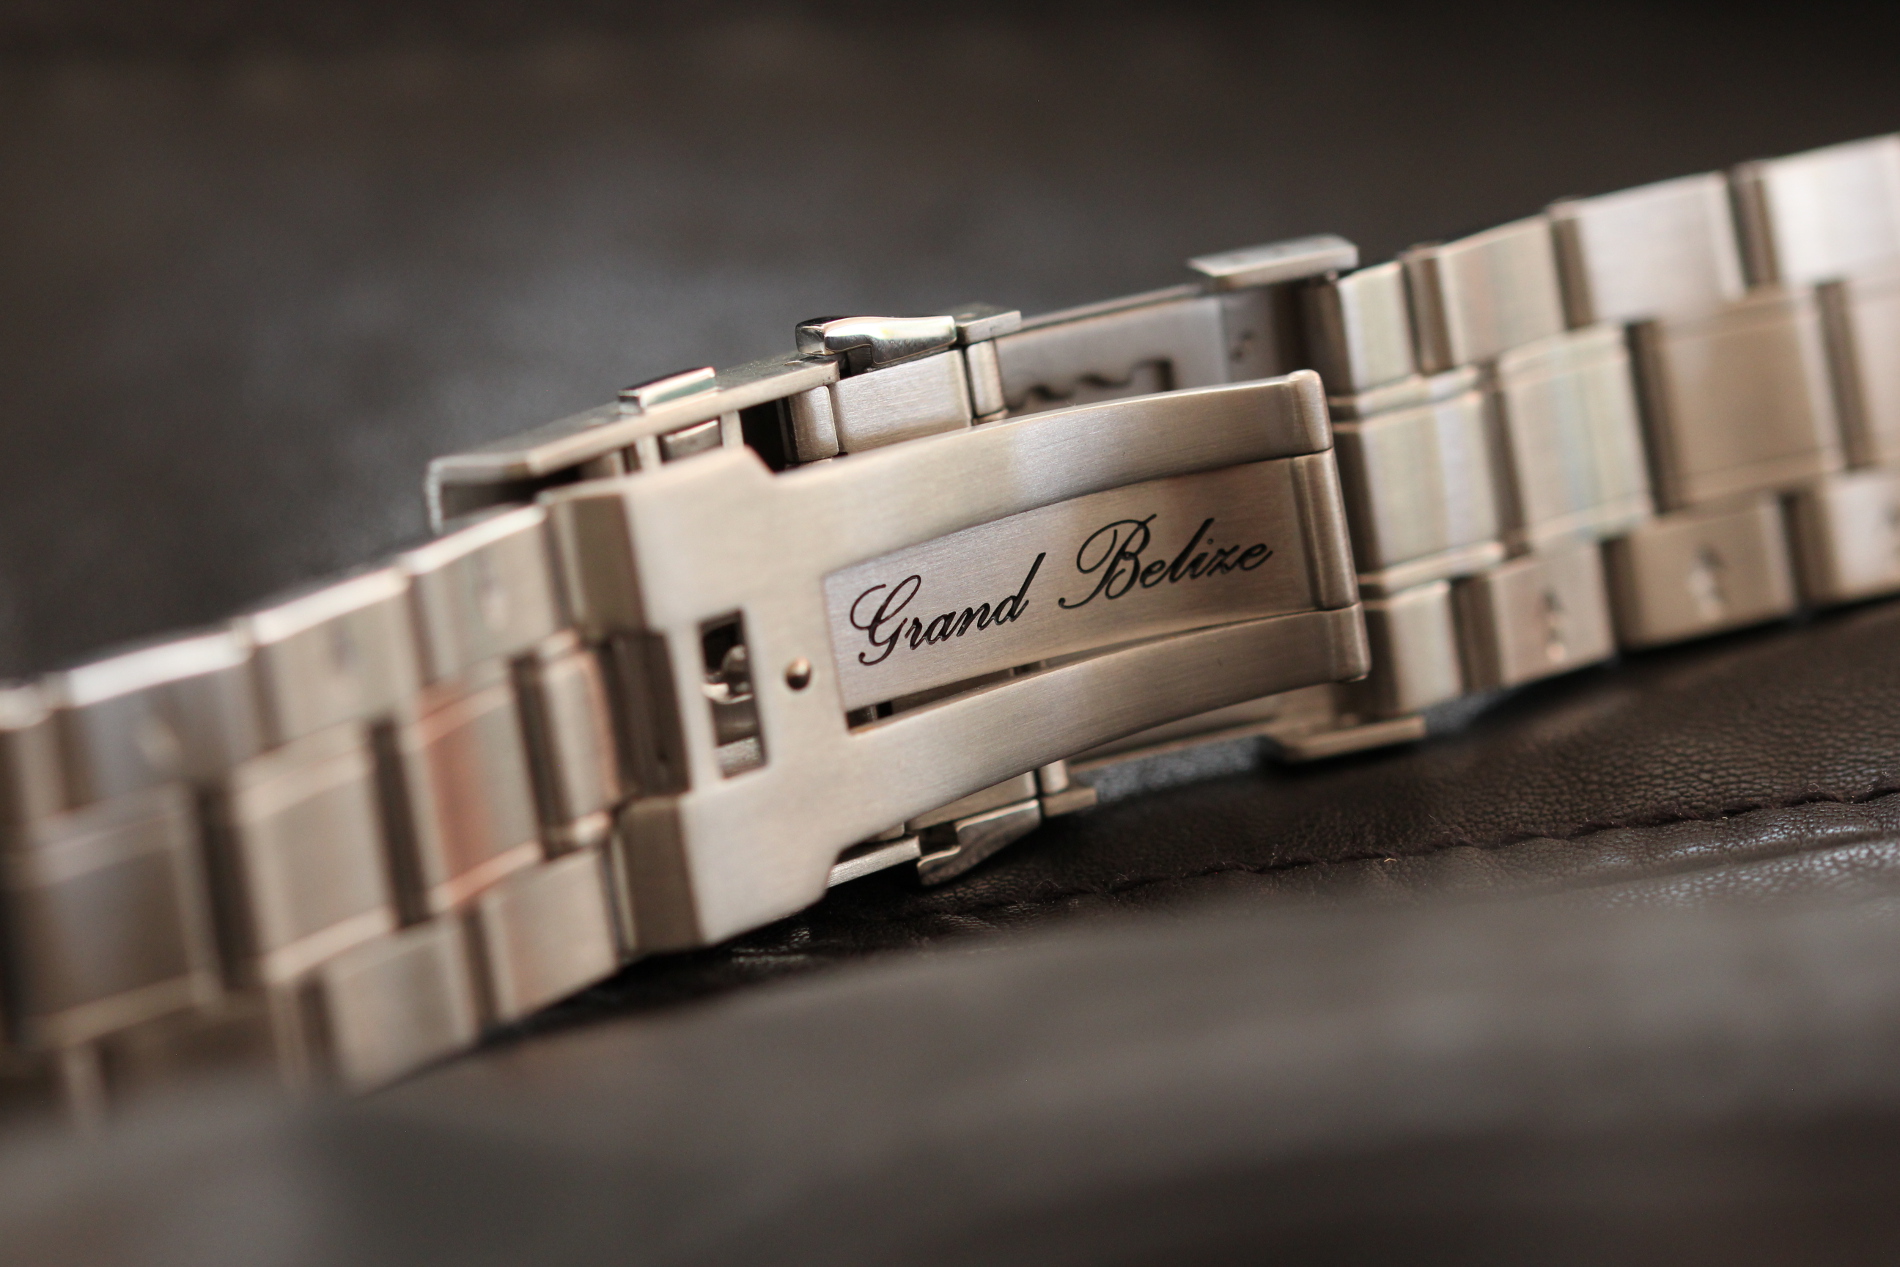 Grand Belize watch by candino 